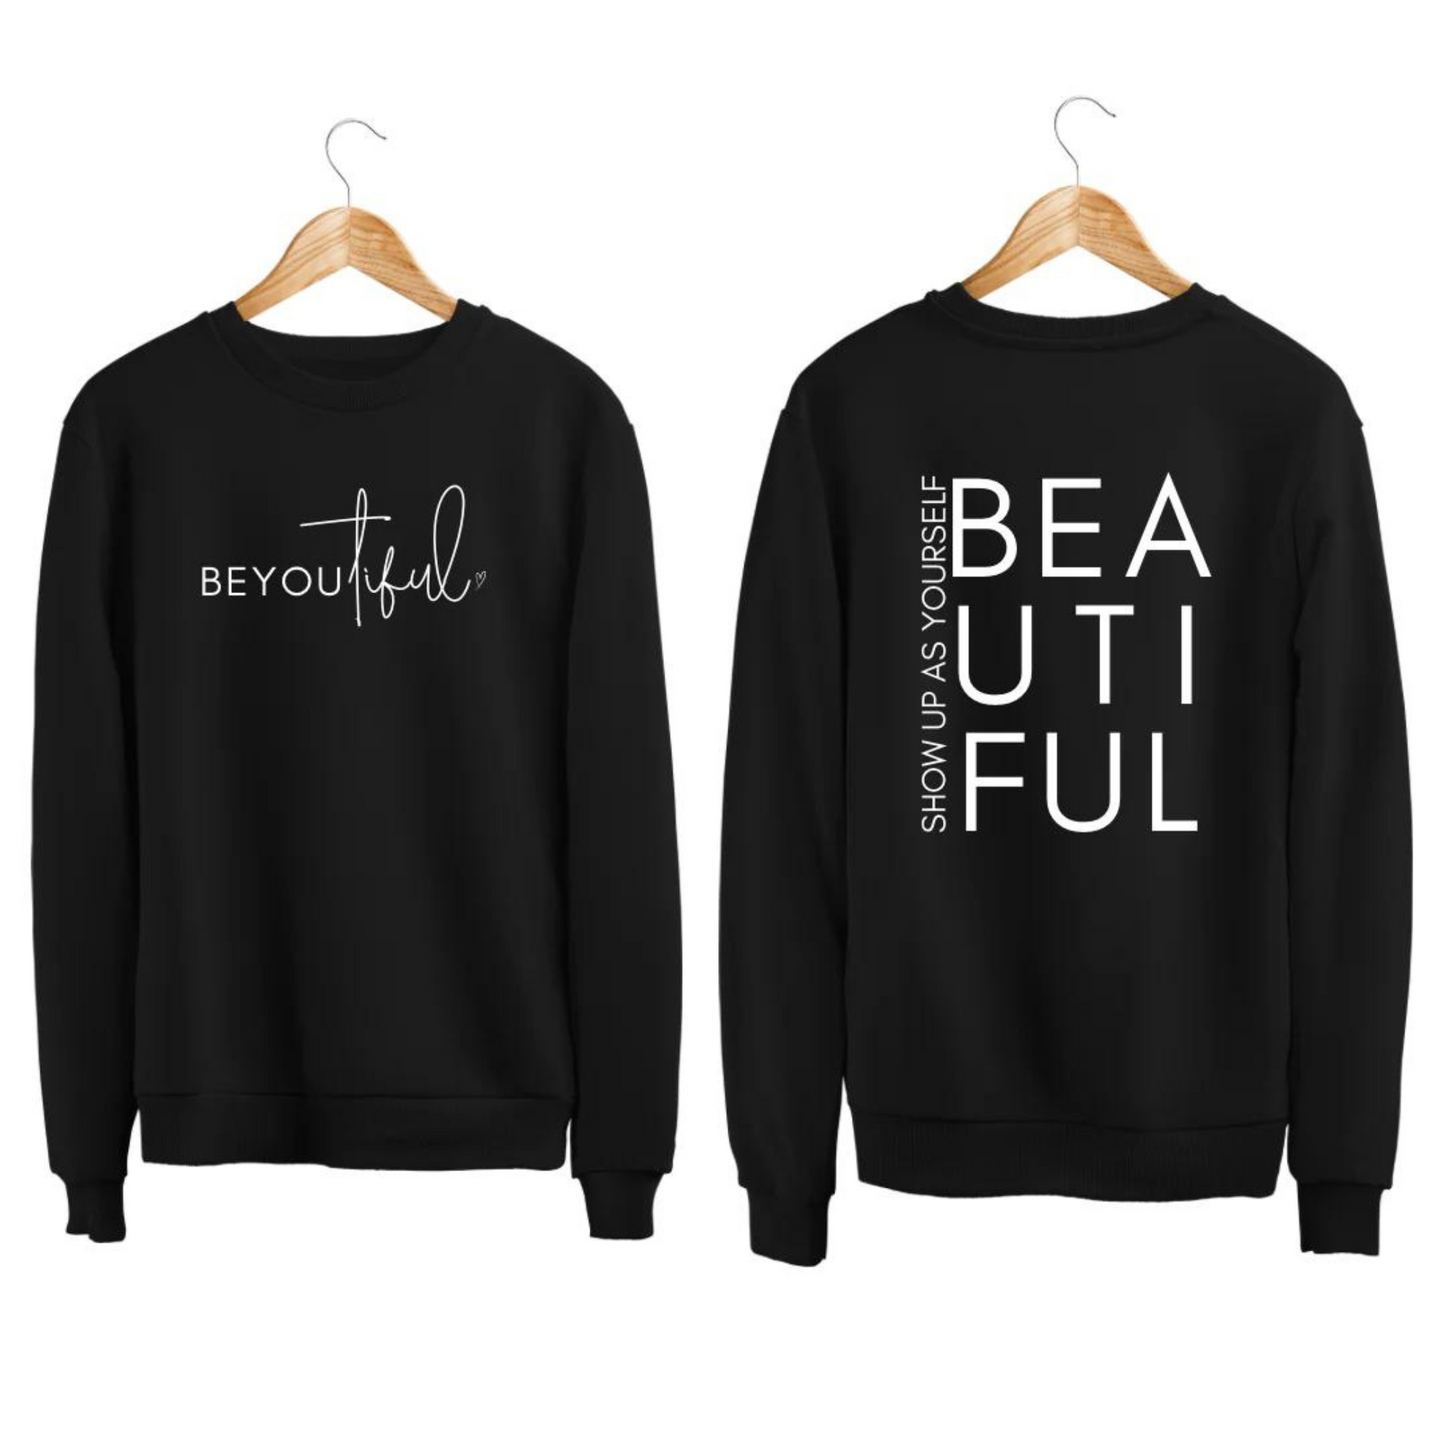 Show Up As Yourself Shirt Be You-tiful Shirt Authenticity & Self-Love Fashion Minimalist Positive Affirmation Shirt Mental Wellness Clothing